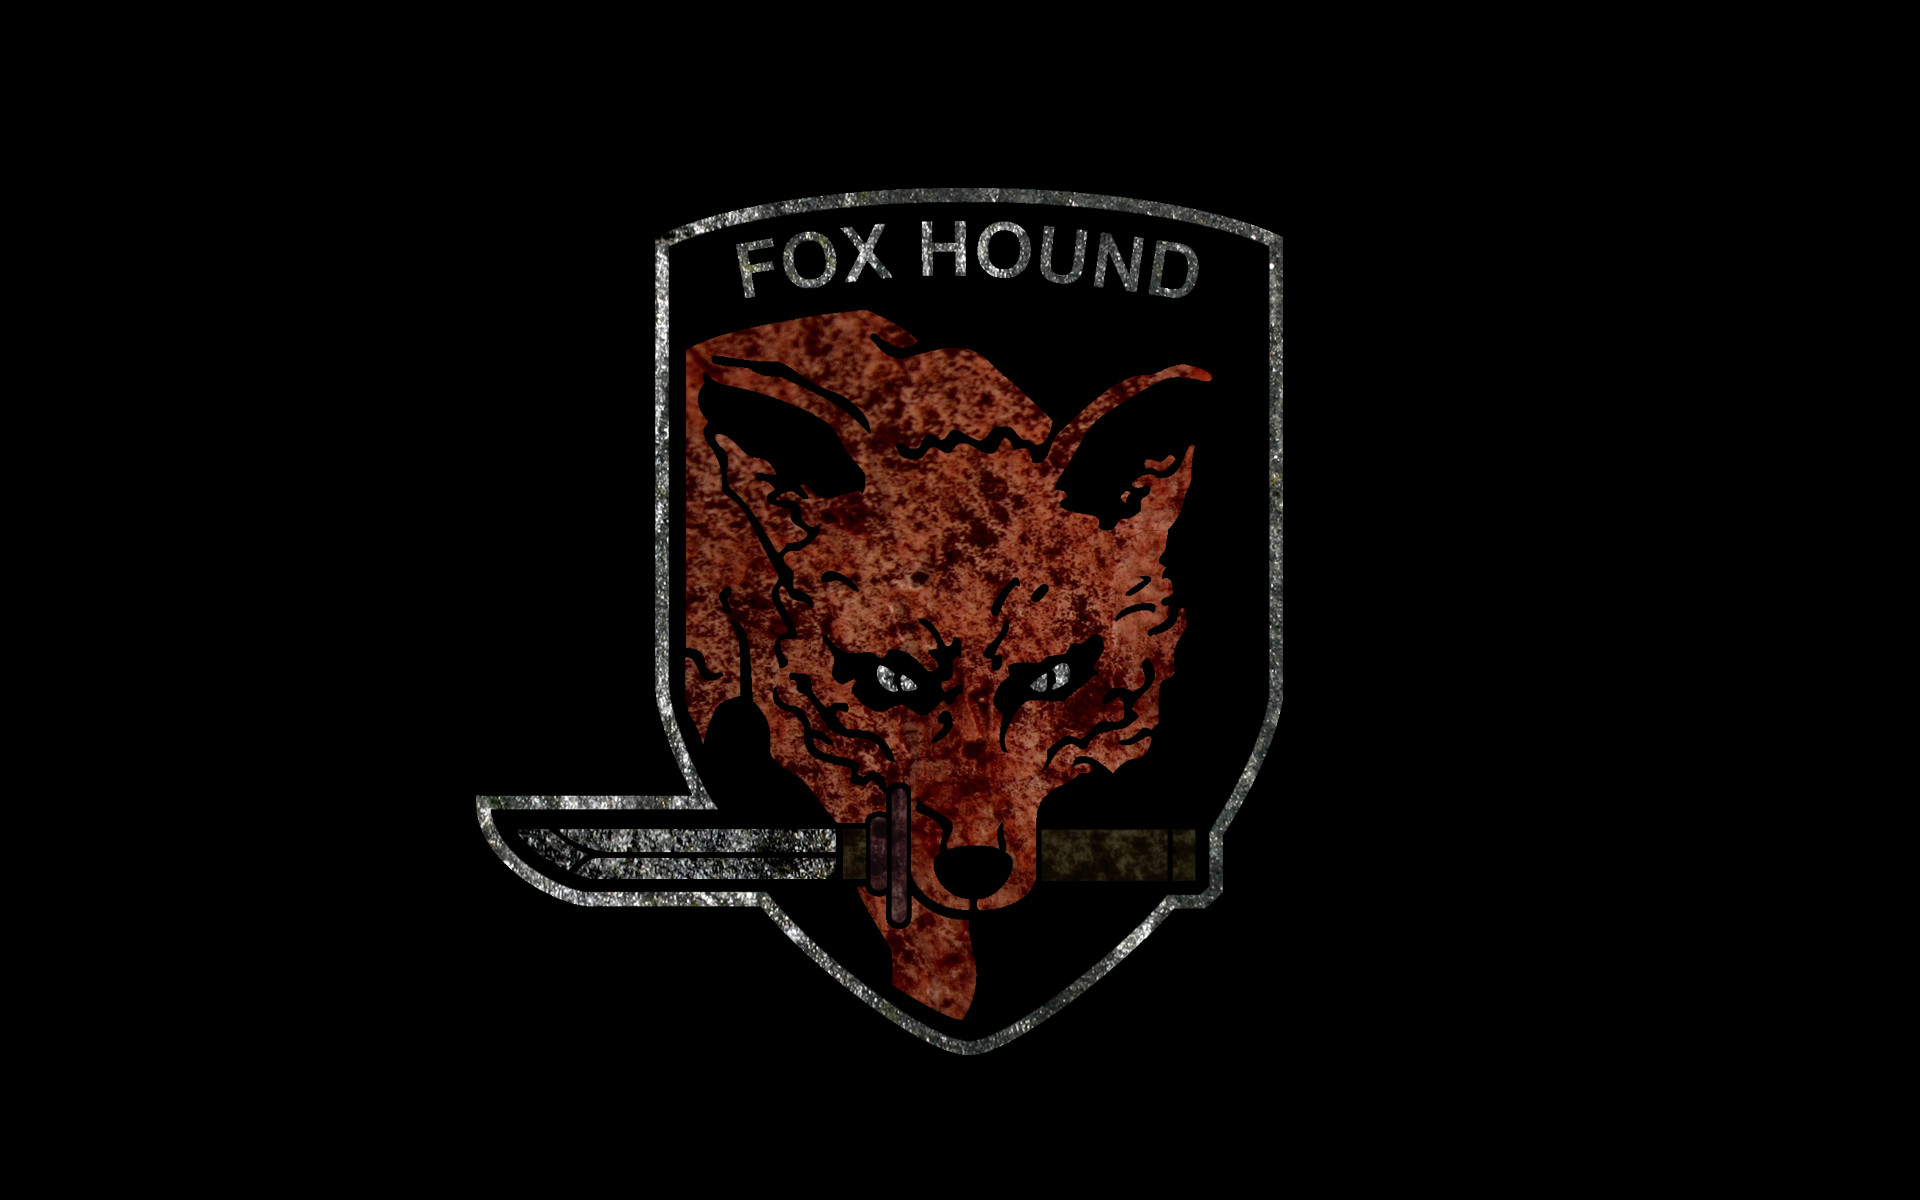 Metal Gear Solid Video Games Mgs Fox Hound 695129 With Resolutions